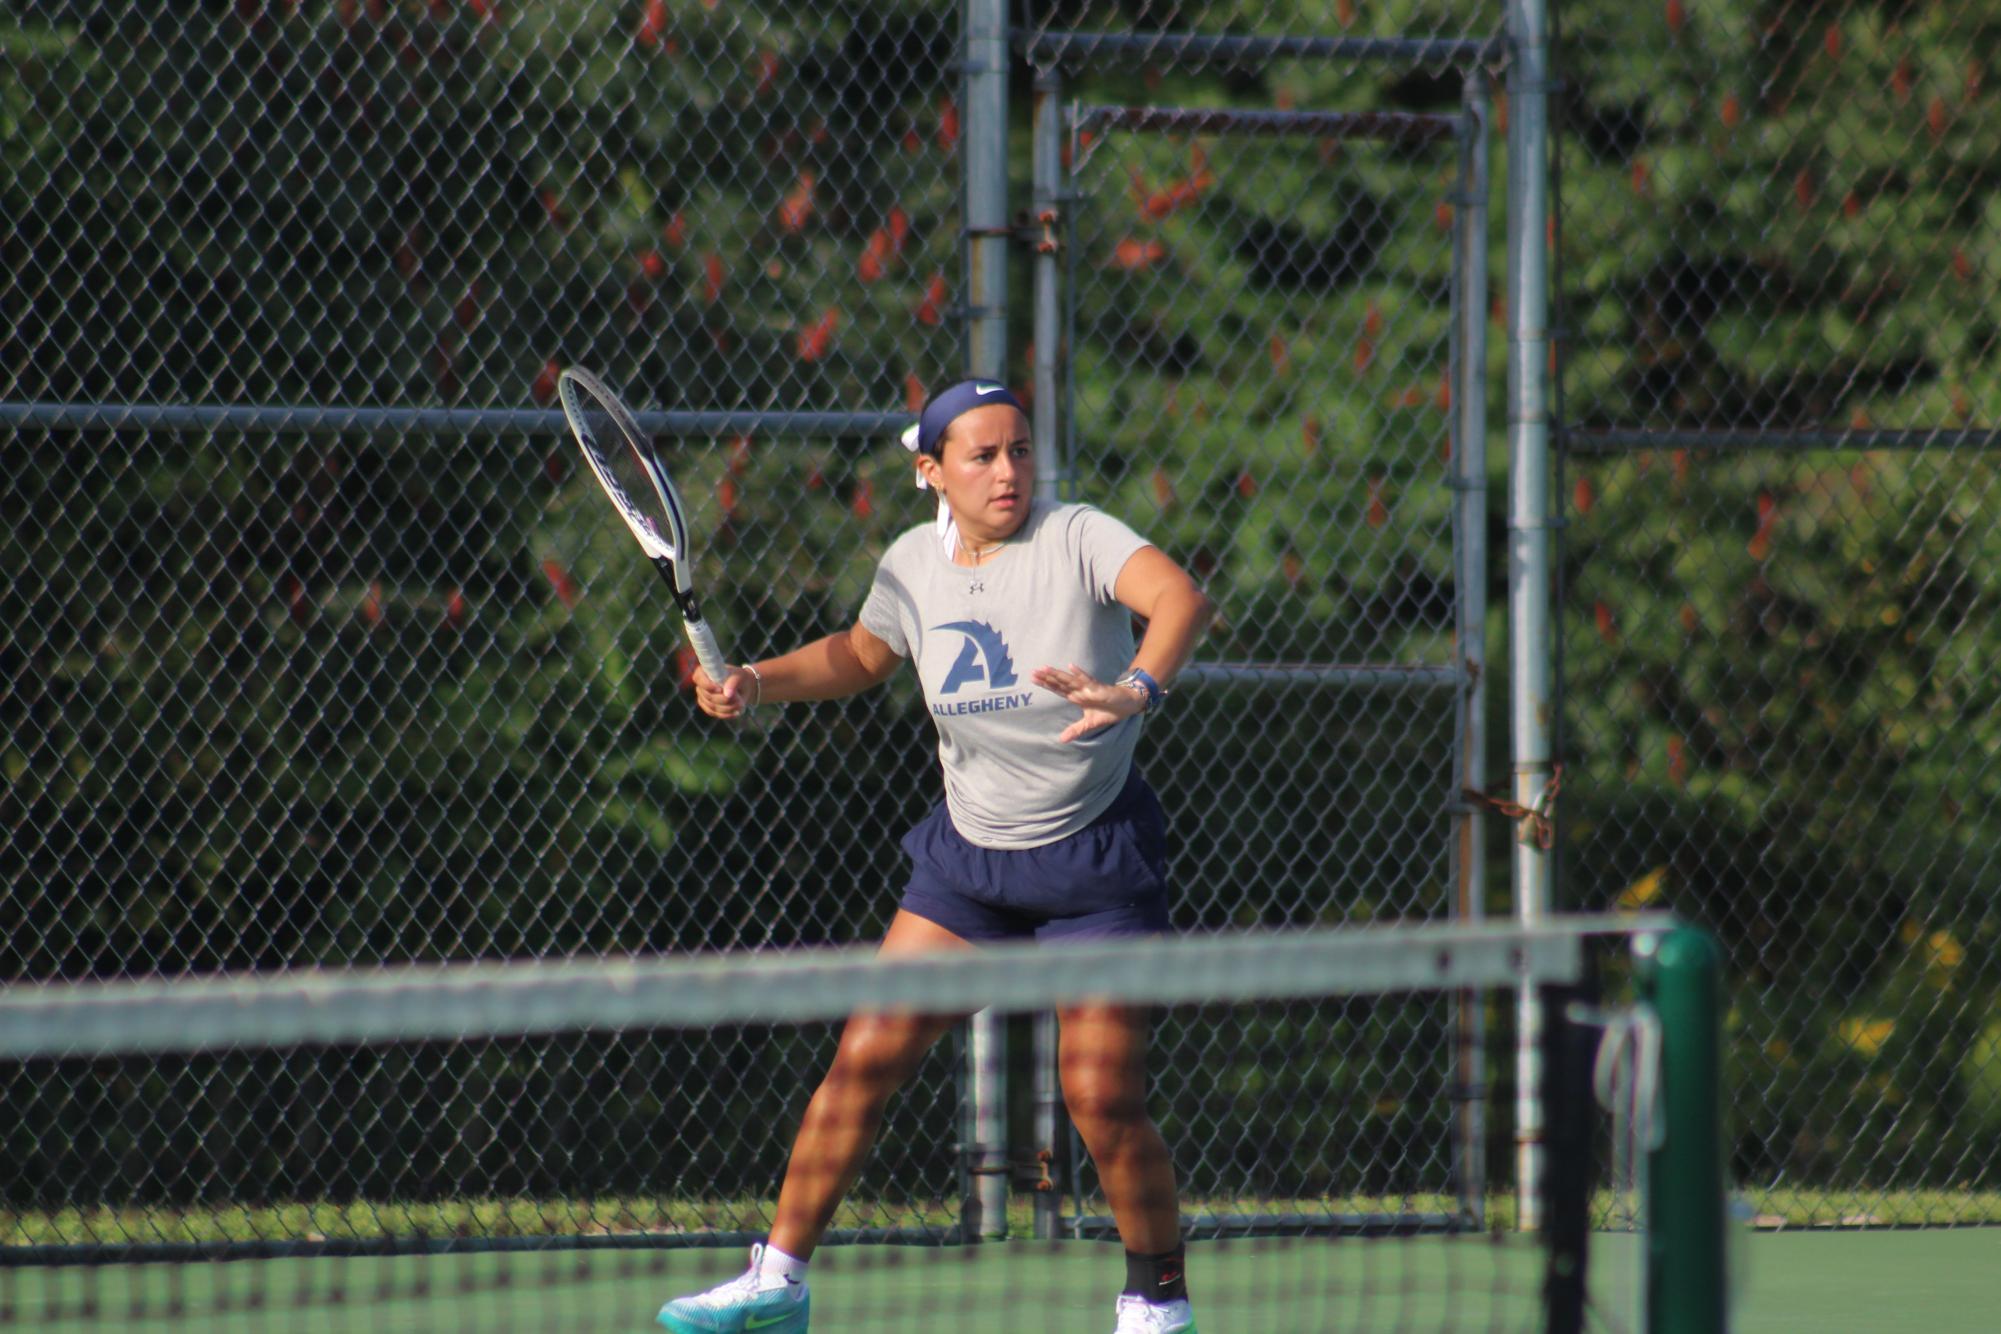 Jean-Arlette Legrand, ’24, waiting to return the ball to her opponent during the Allegheny Invitational.